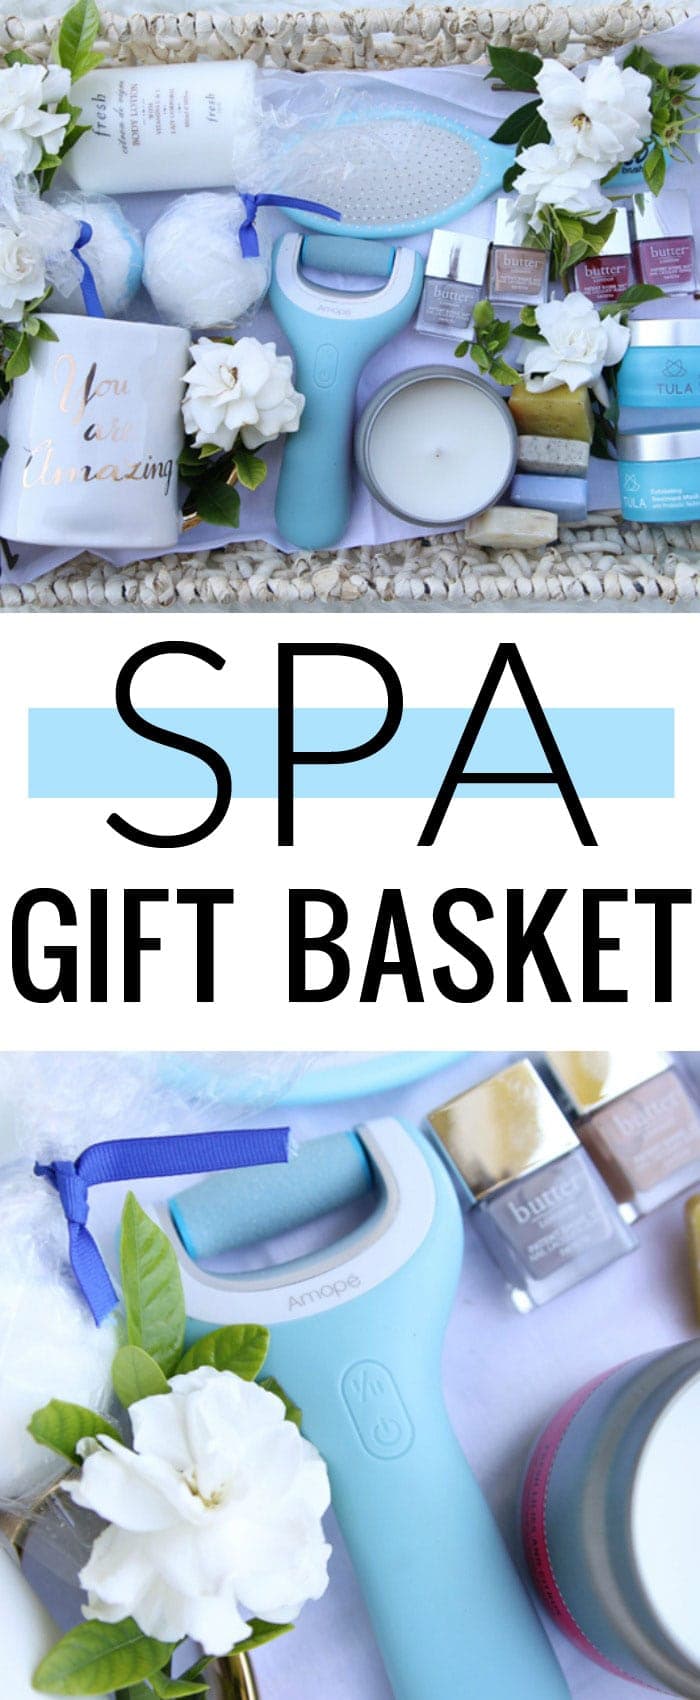 Spa Gift Basket - perfect for any woman that deserves a little pampering!